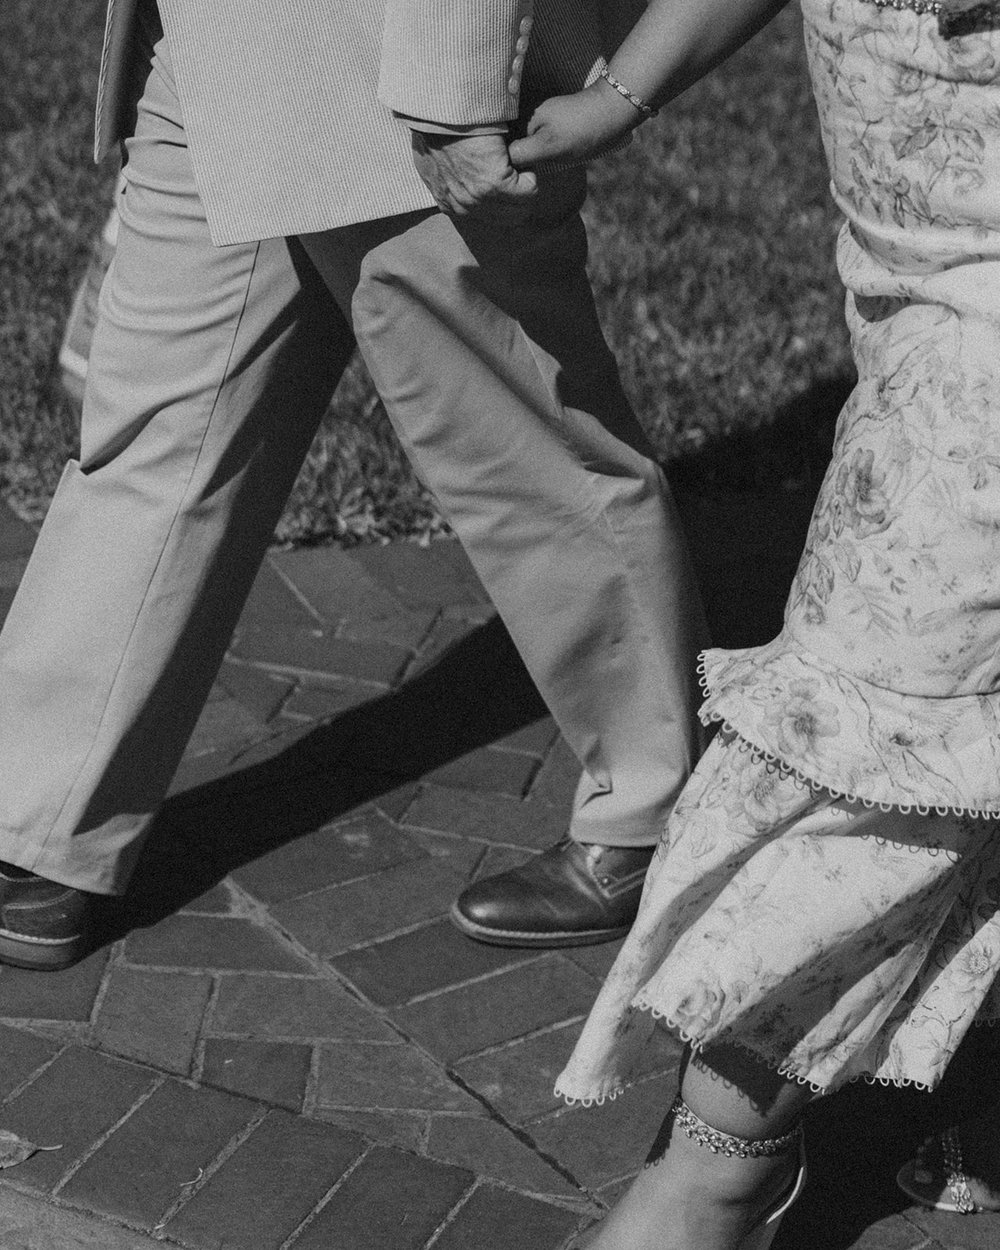 The couple hand in hand walking through the gardens.